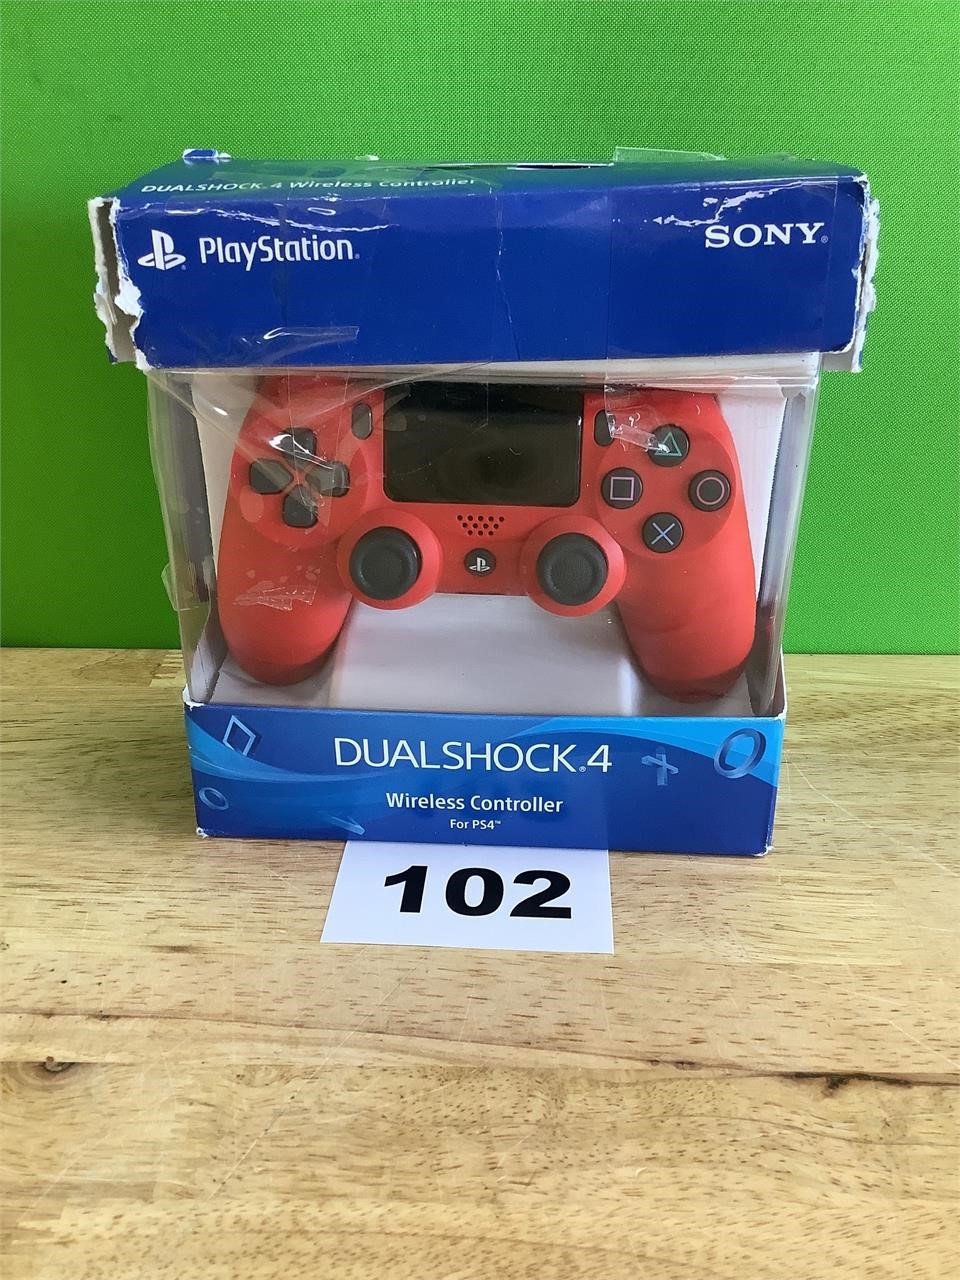 Sony PS4 DualShock 4 Controller - Red